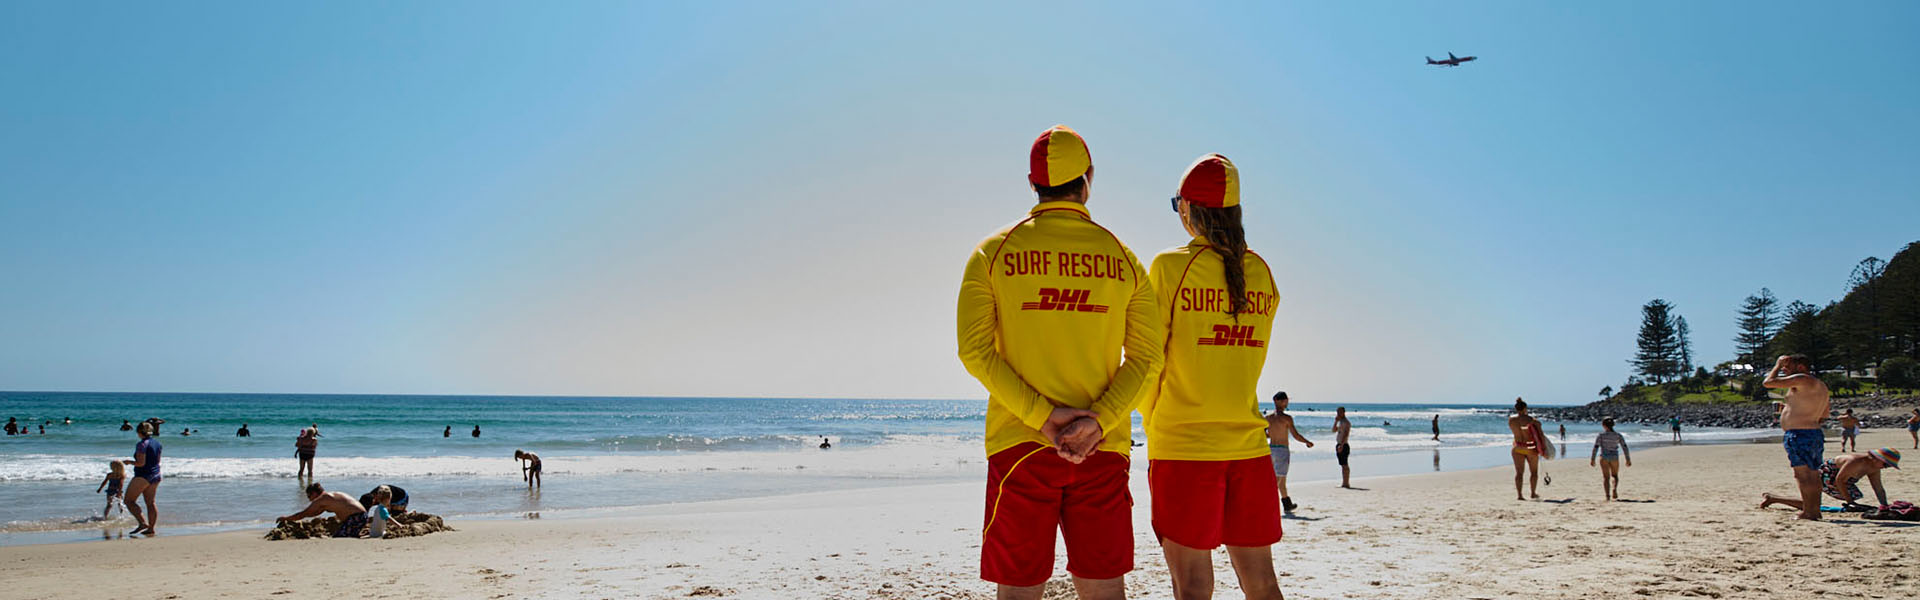 Life savers on beach at Queensland 